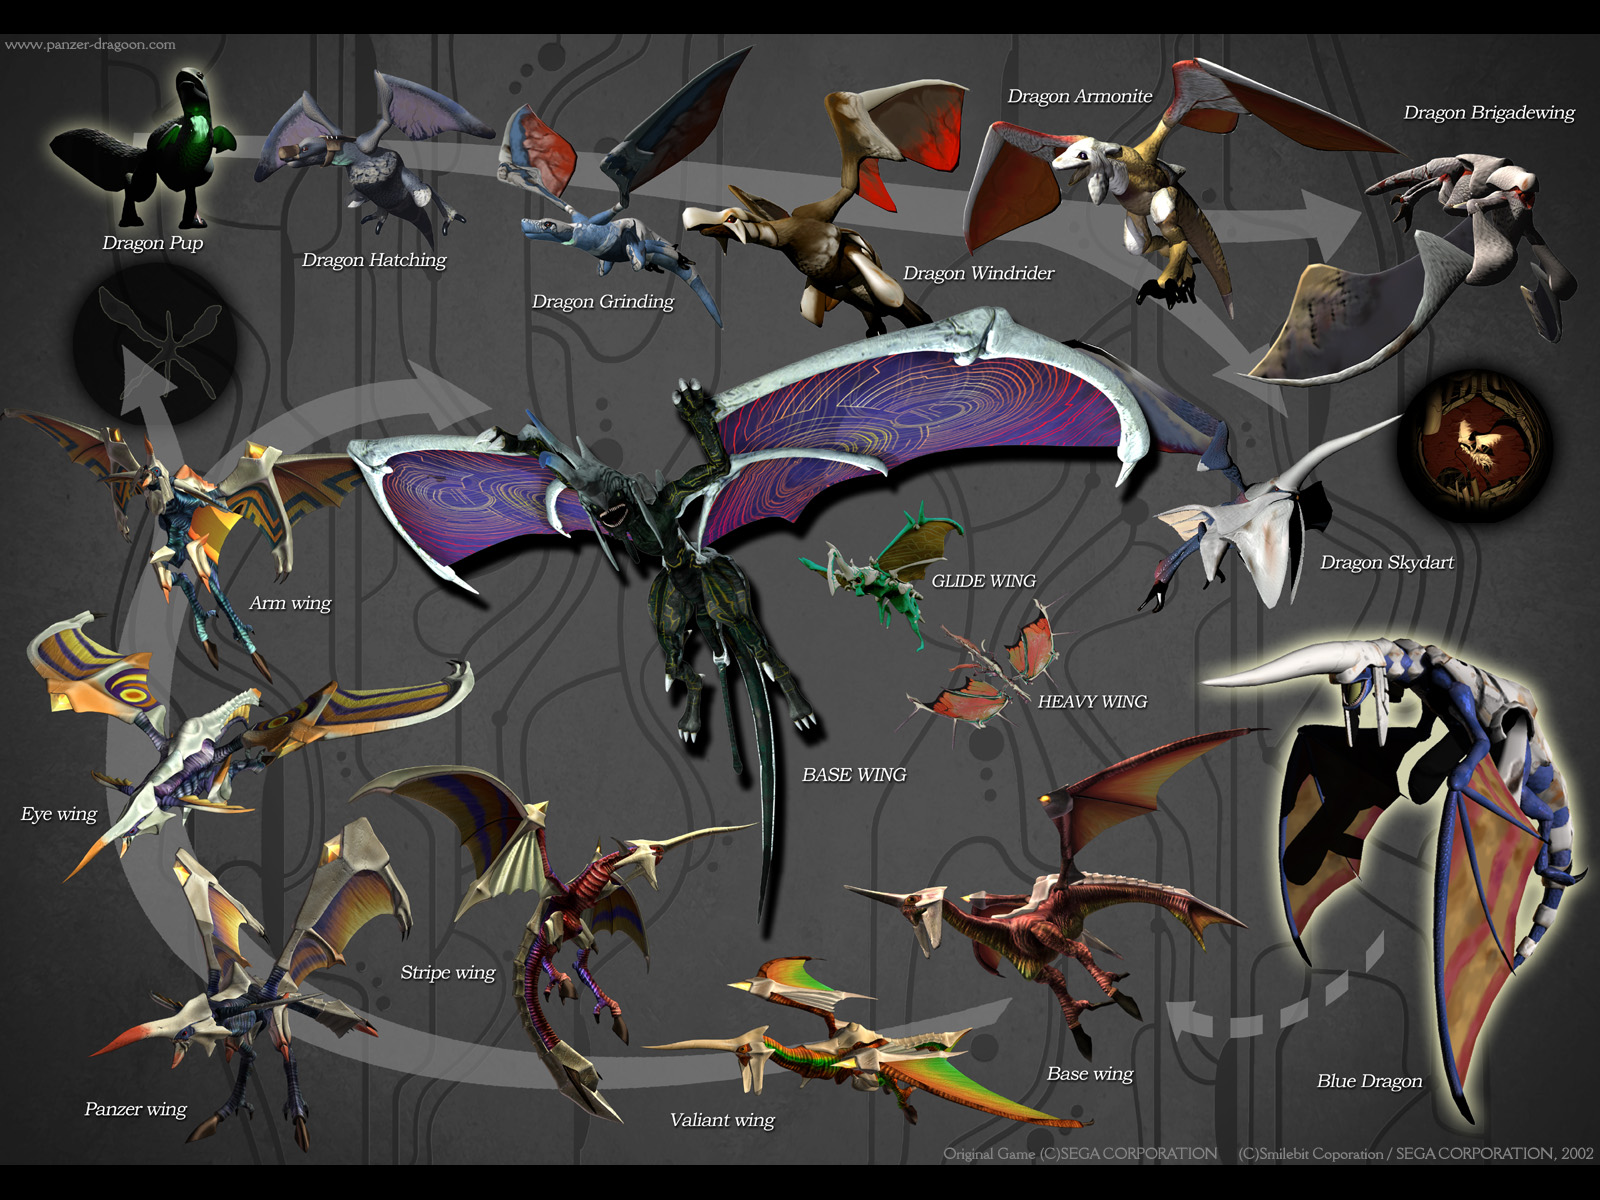 A wallpaper showing the evolution of the dragon from the official Panzer Dragoon website.